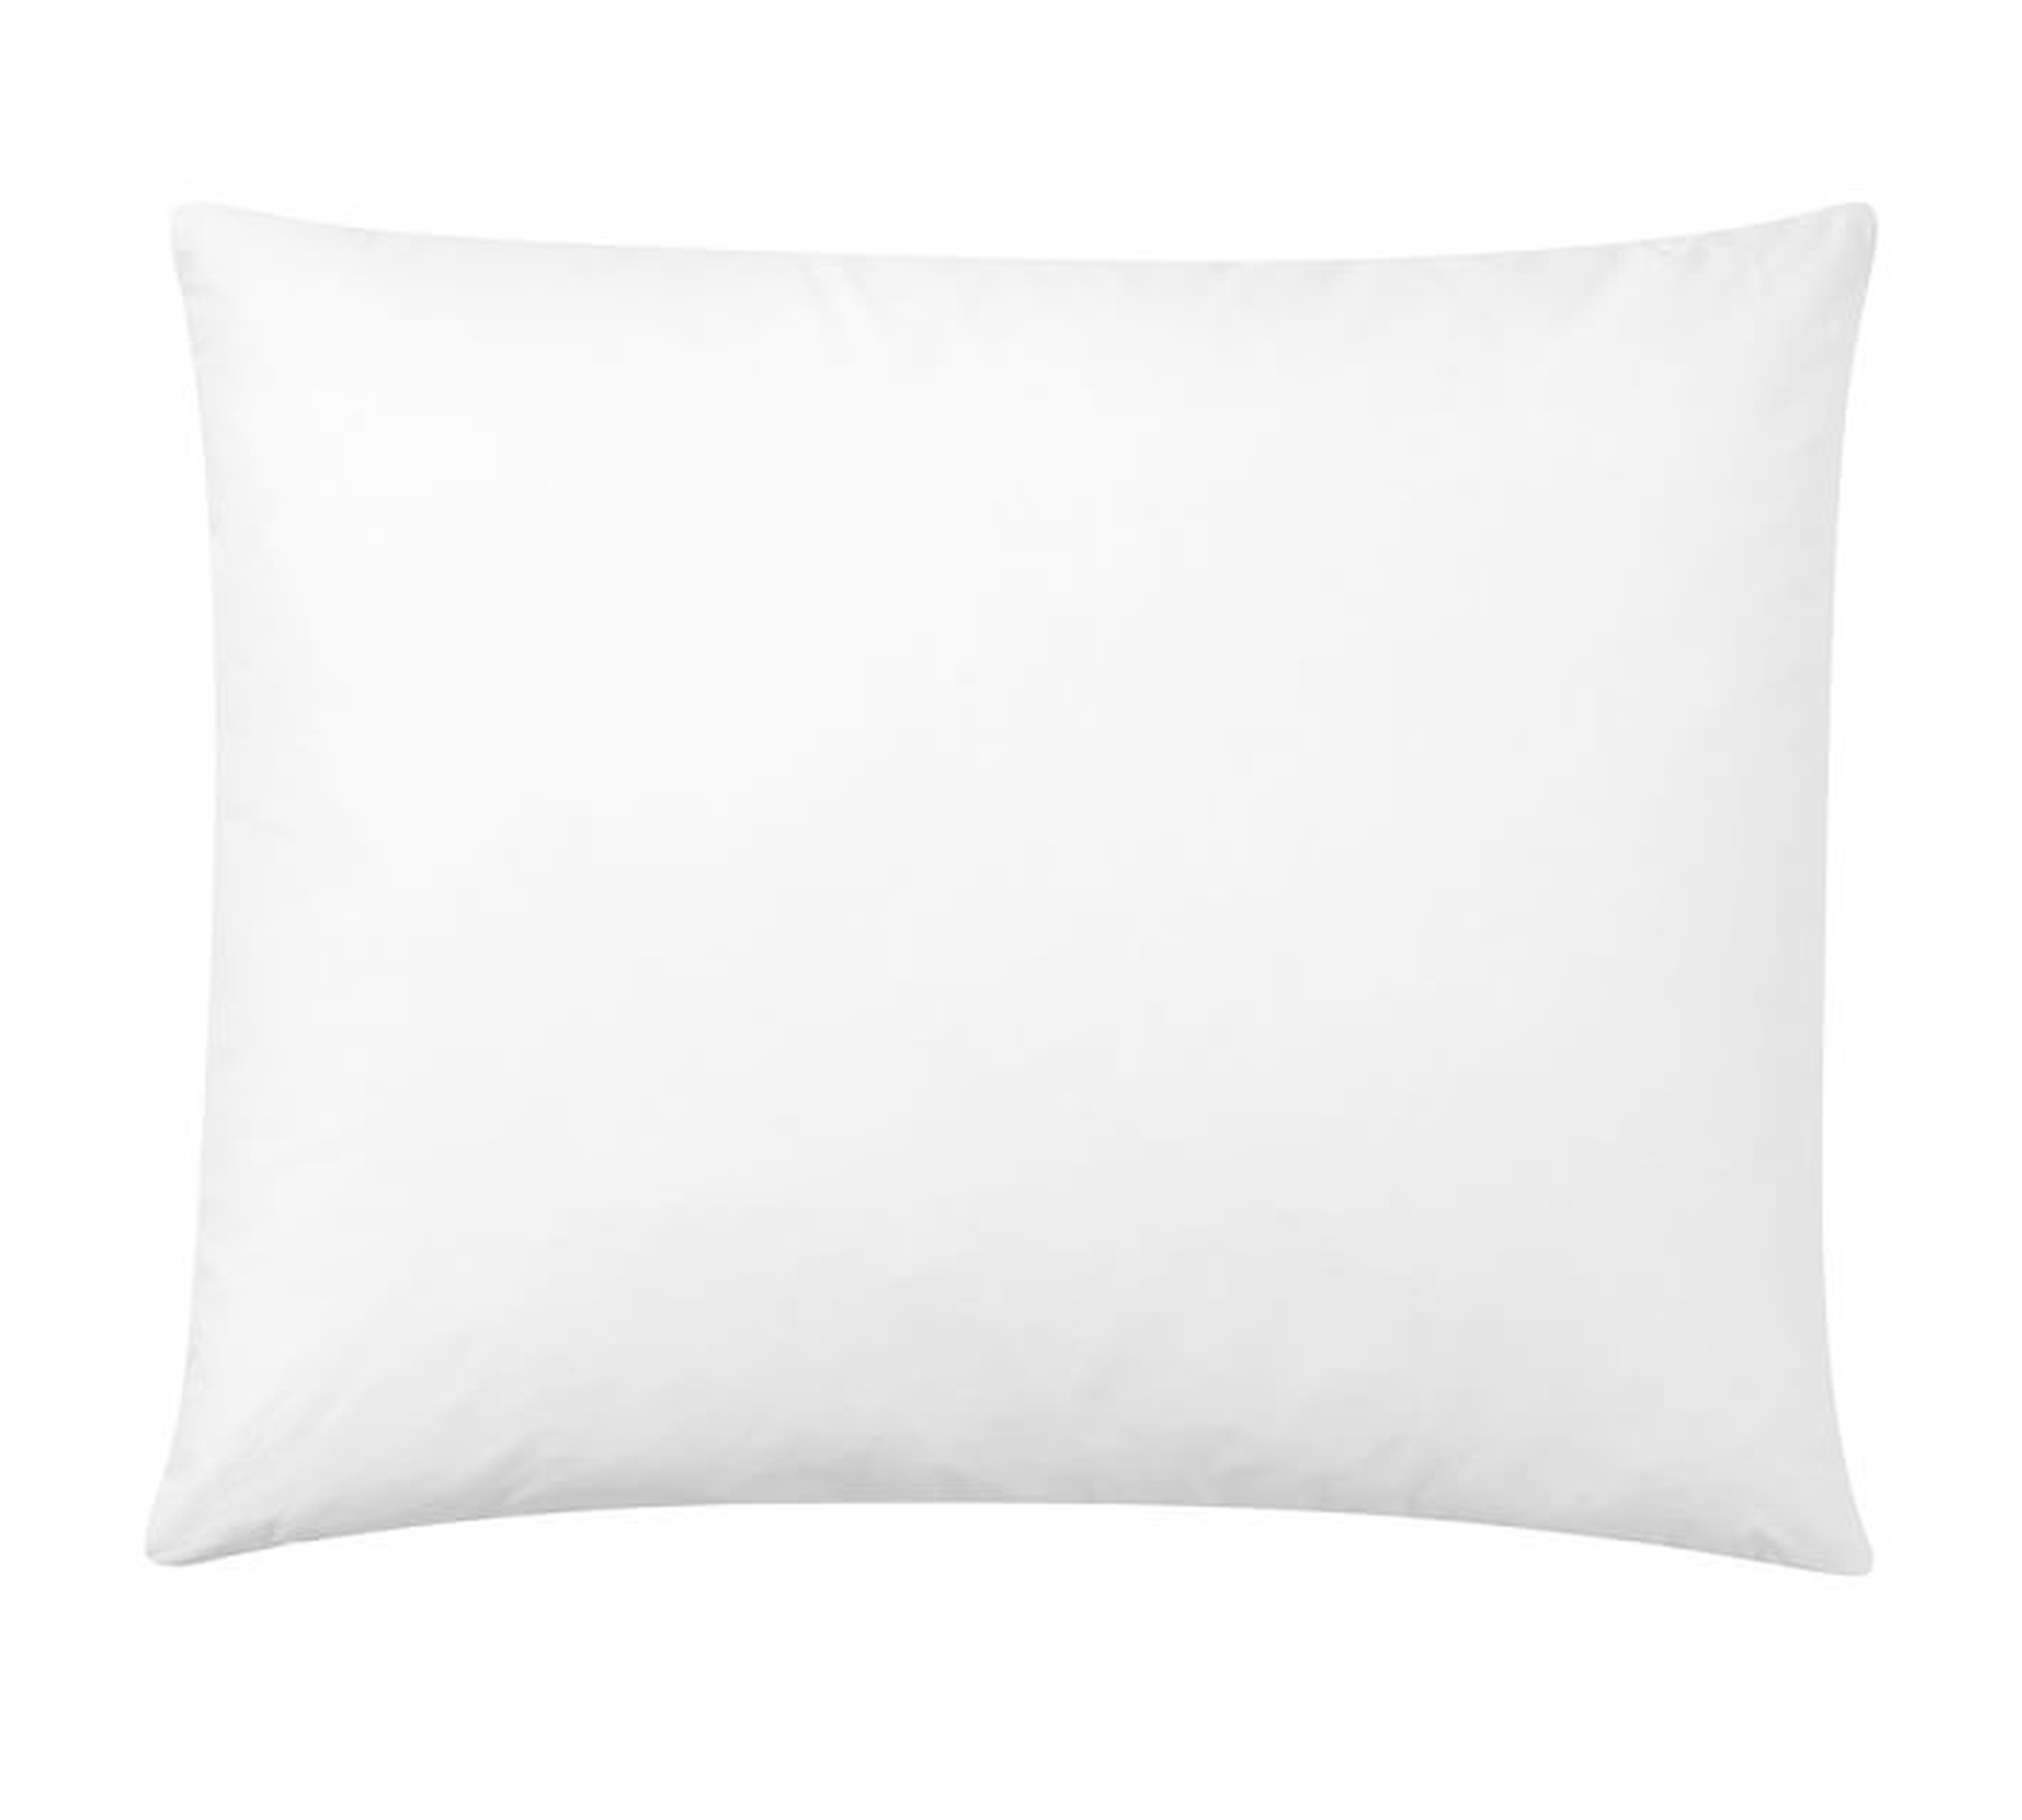 Feather Pillow Insert 20 x 30 - Pottery Barn